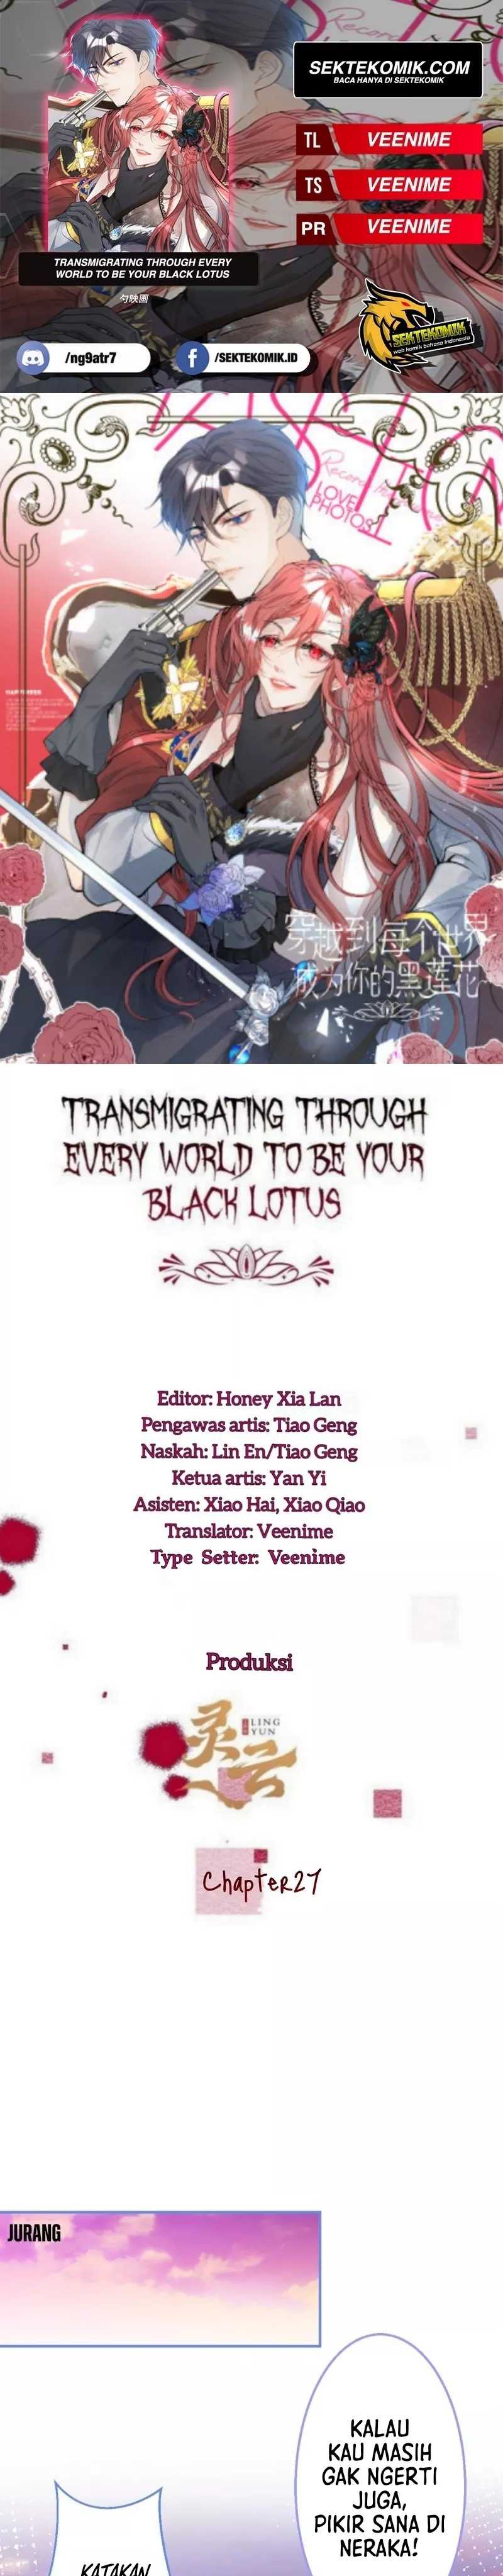 Transmigrating Through Every World To Be Your Black Lotus Chapter 27